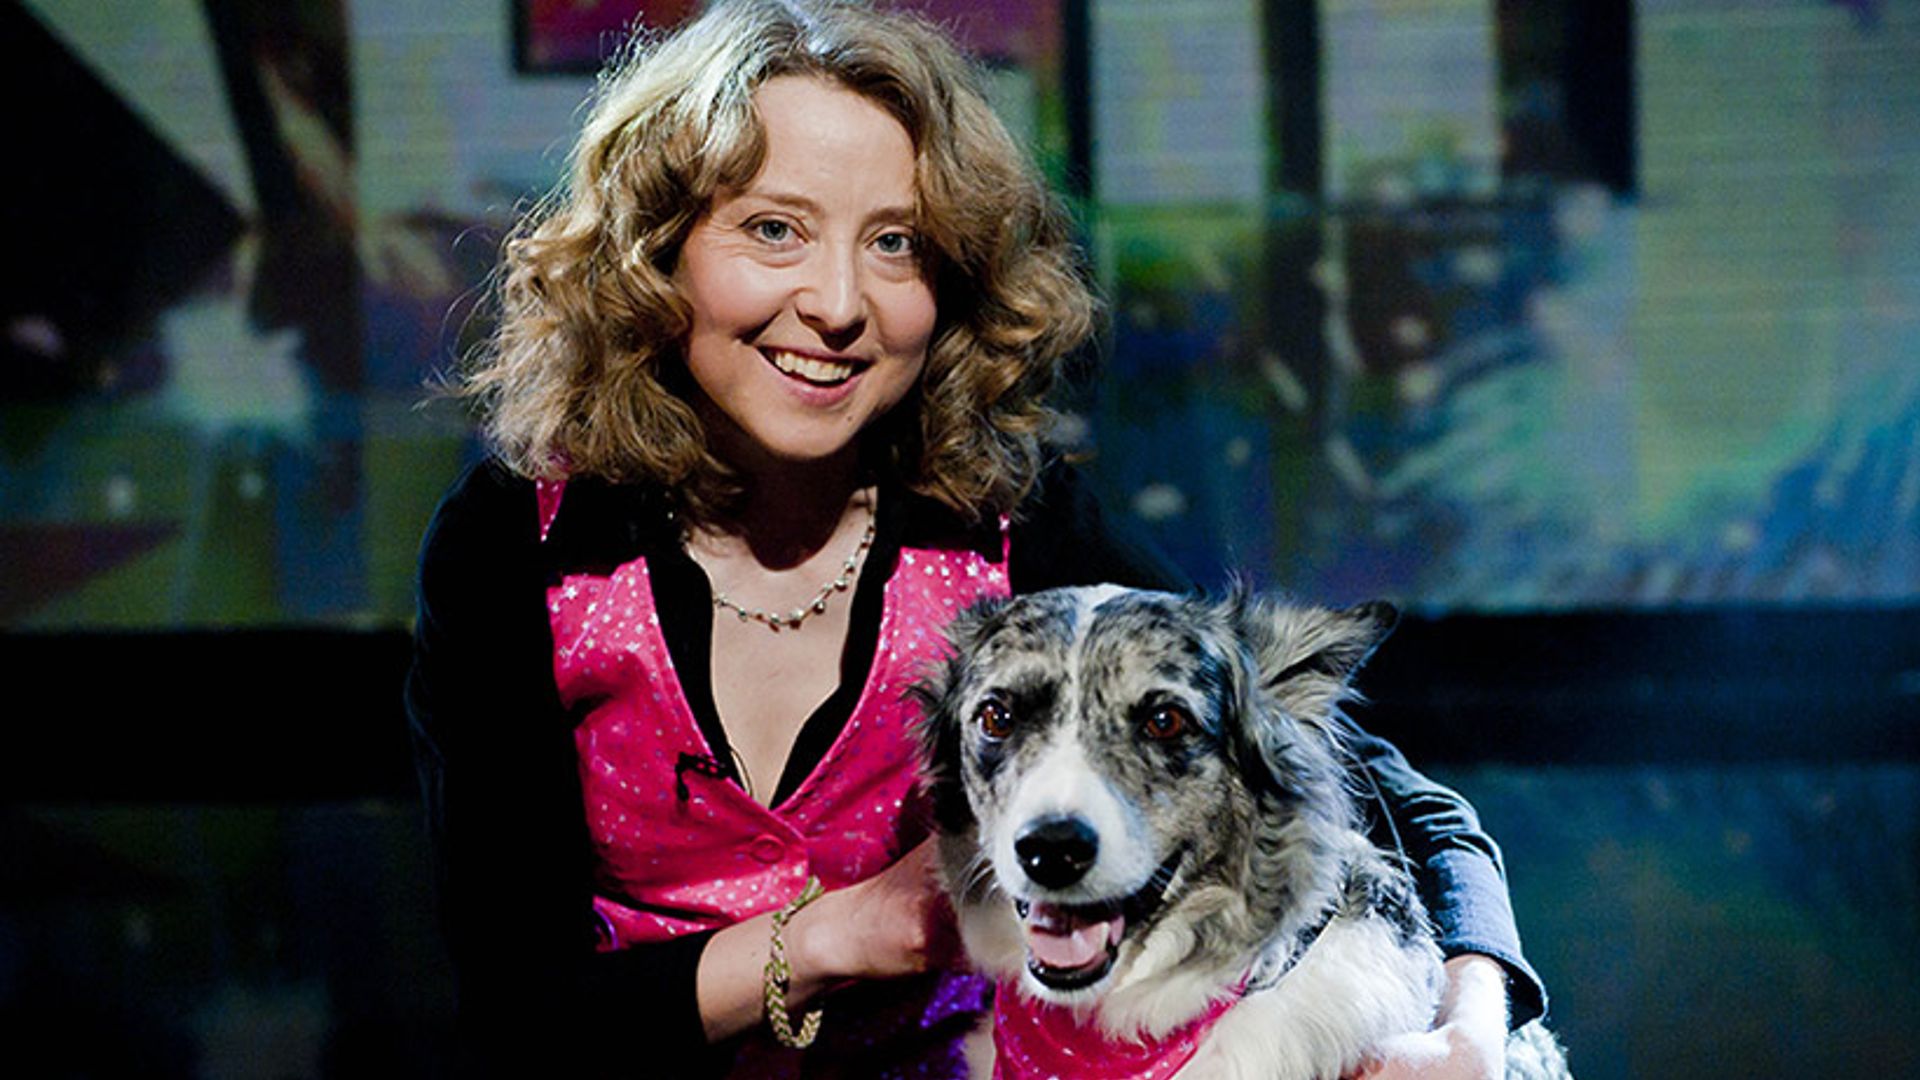 Britain’s Got Talent star Tina Humphrey, who wowed judges with dancing dog Chandi, has died aged 45